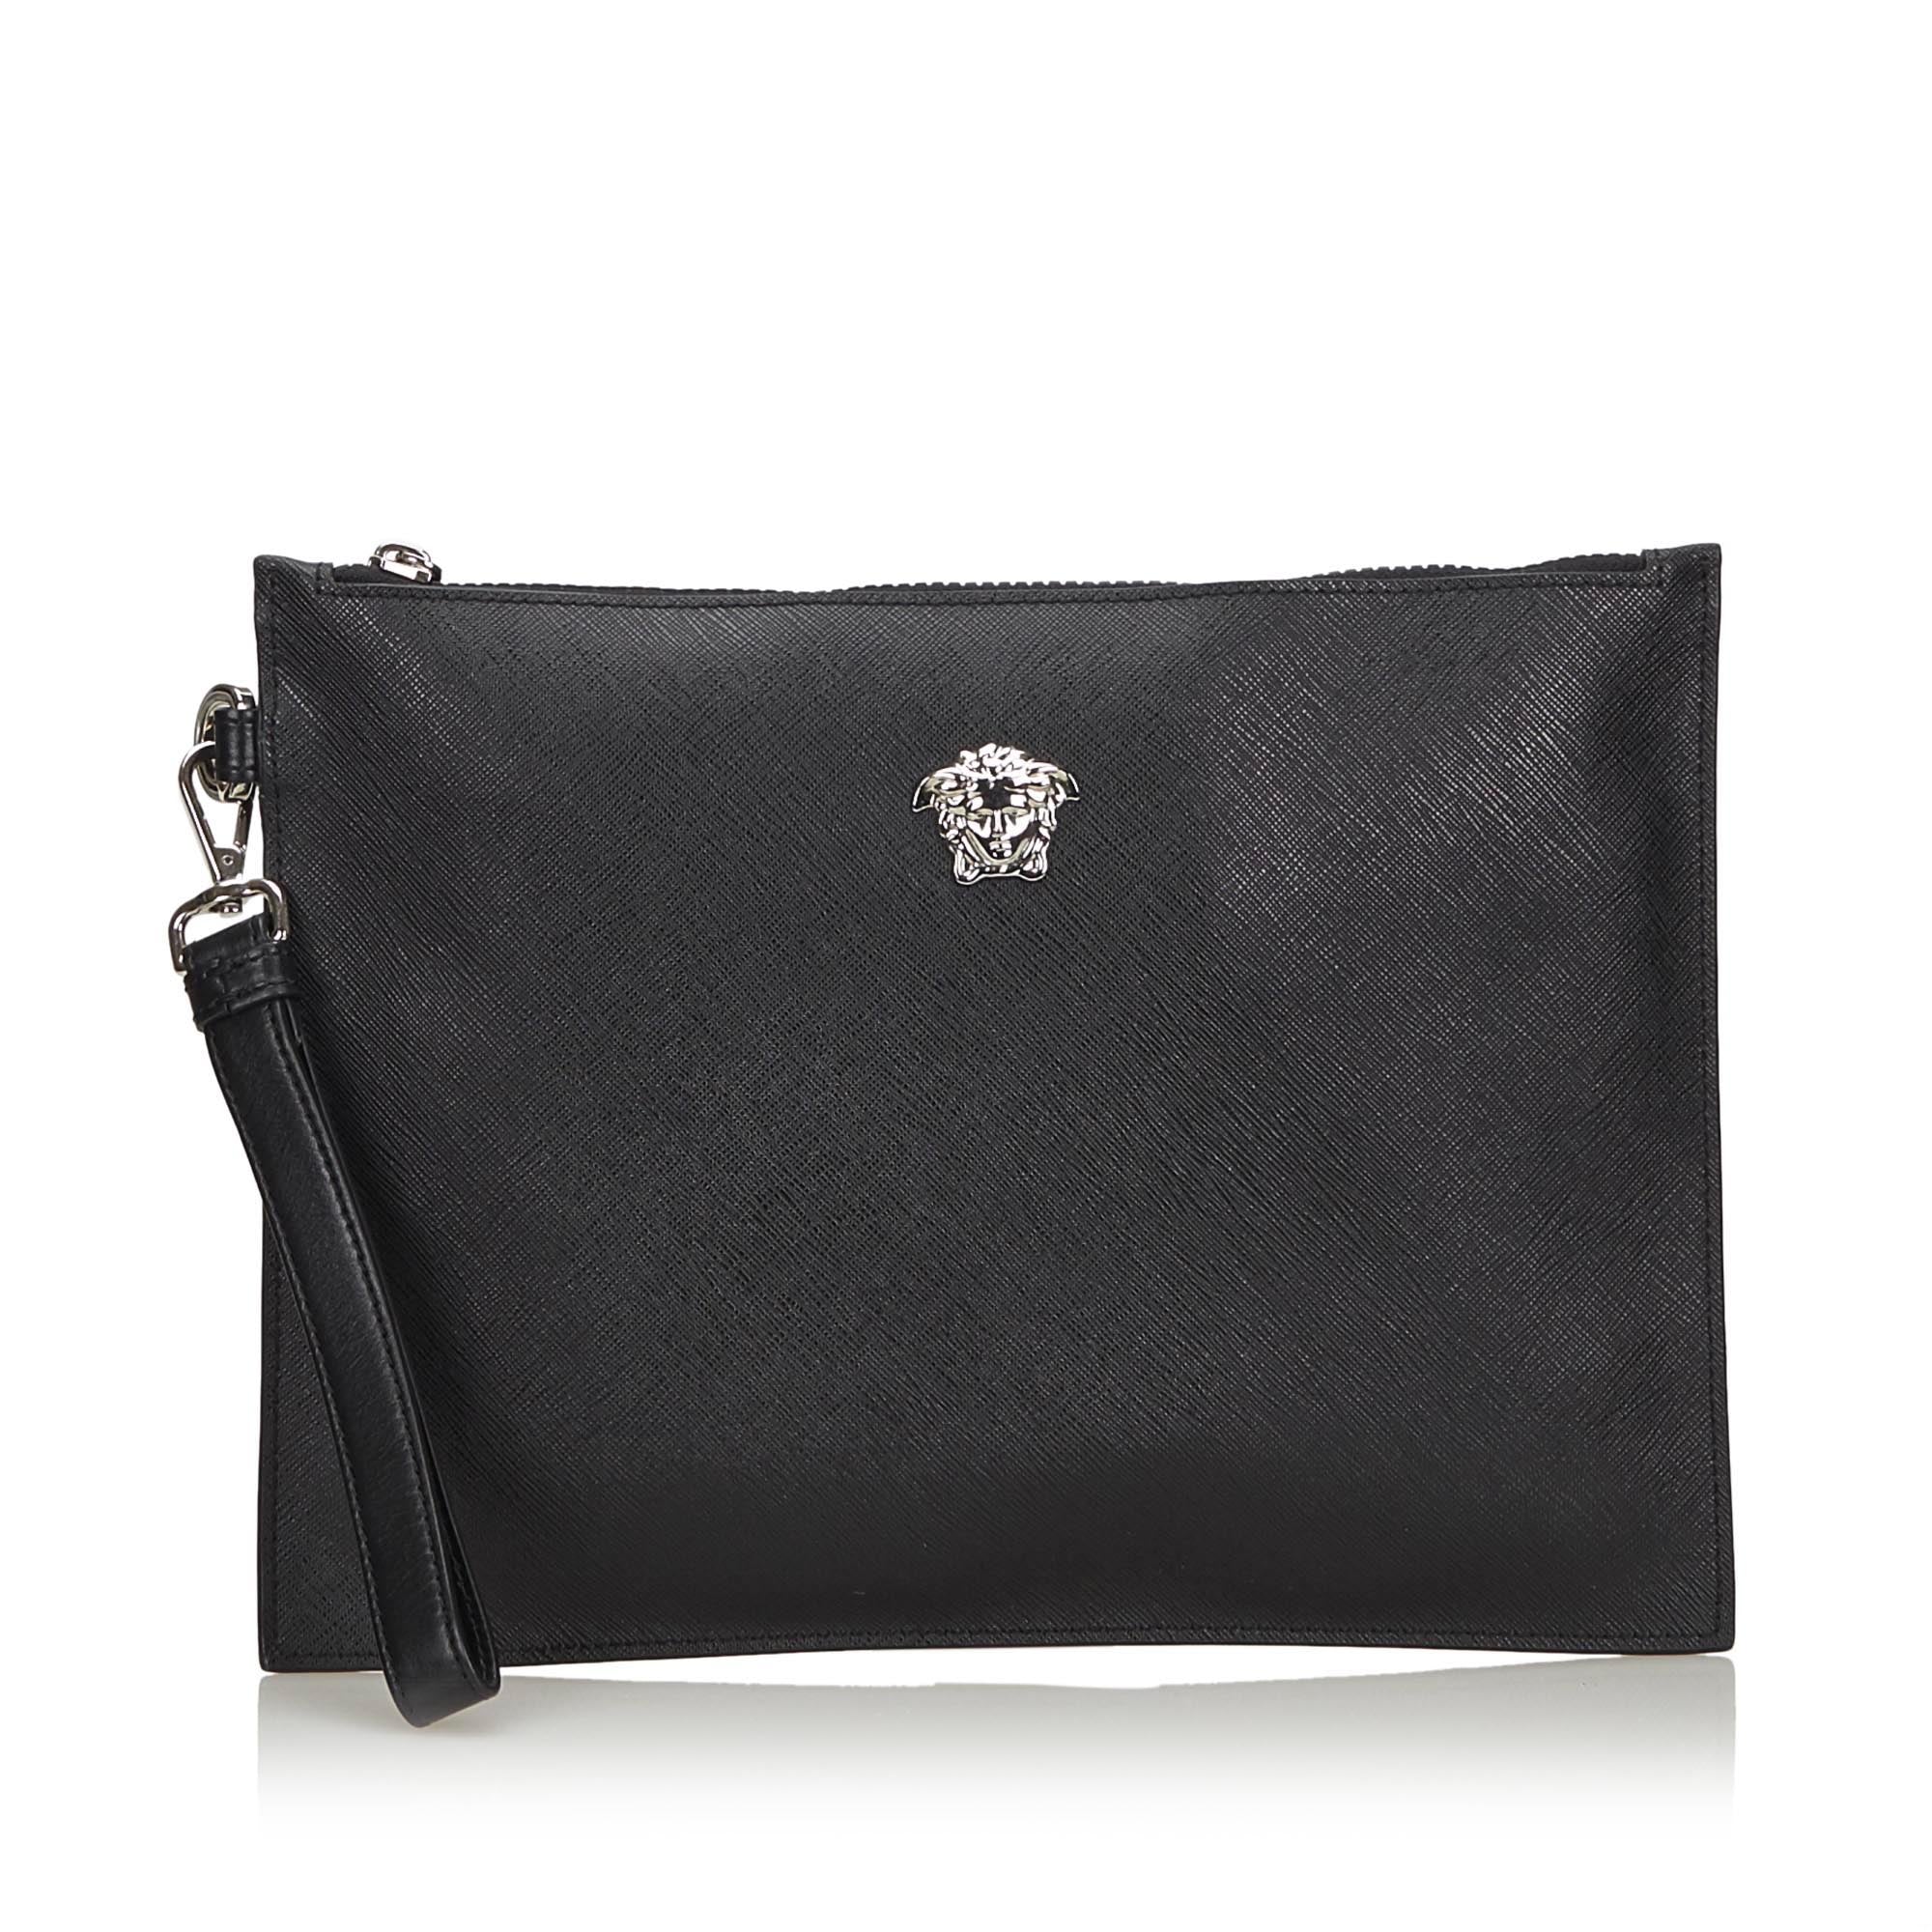 Buy & Consign Authentic Versace Medusa Clutch Bag at The Plush Posh